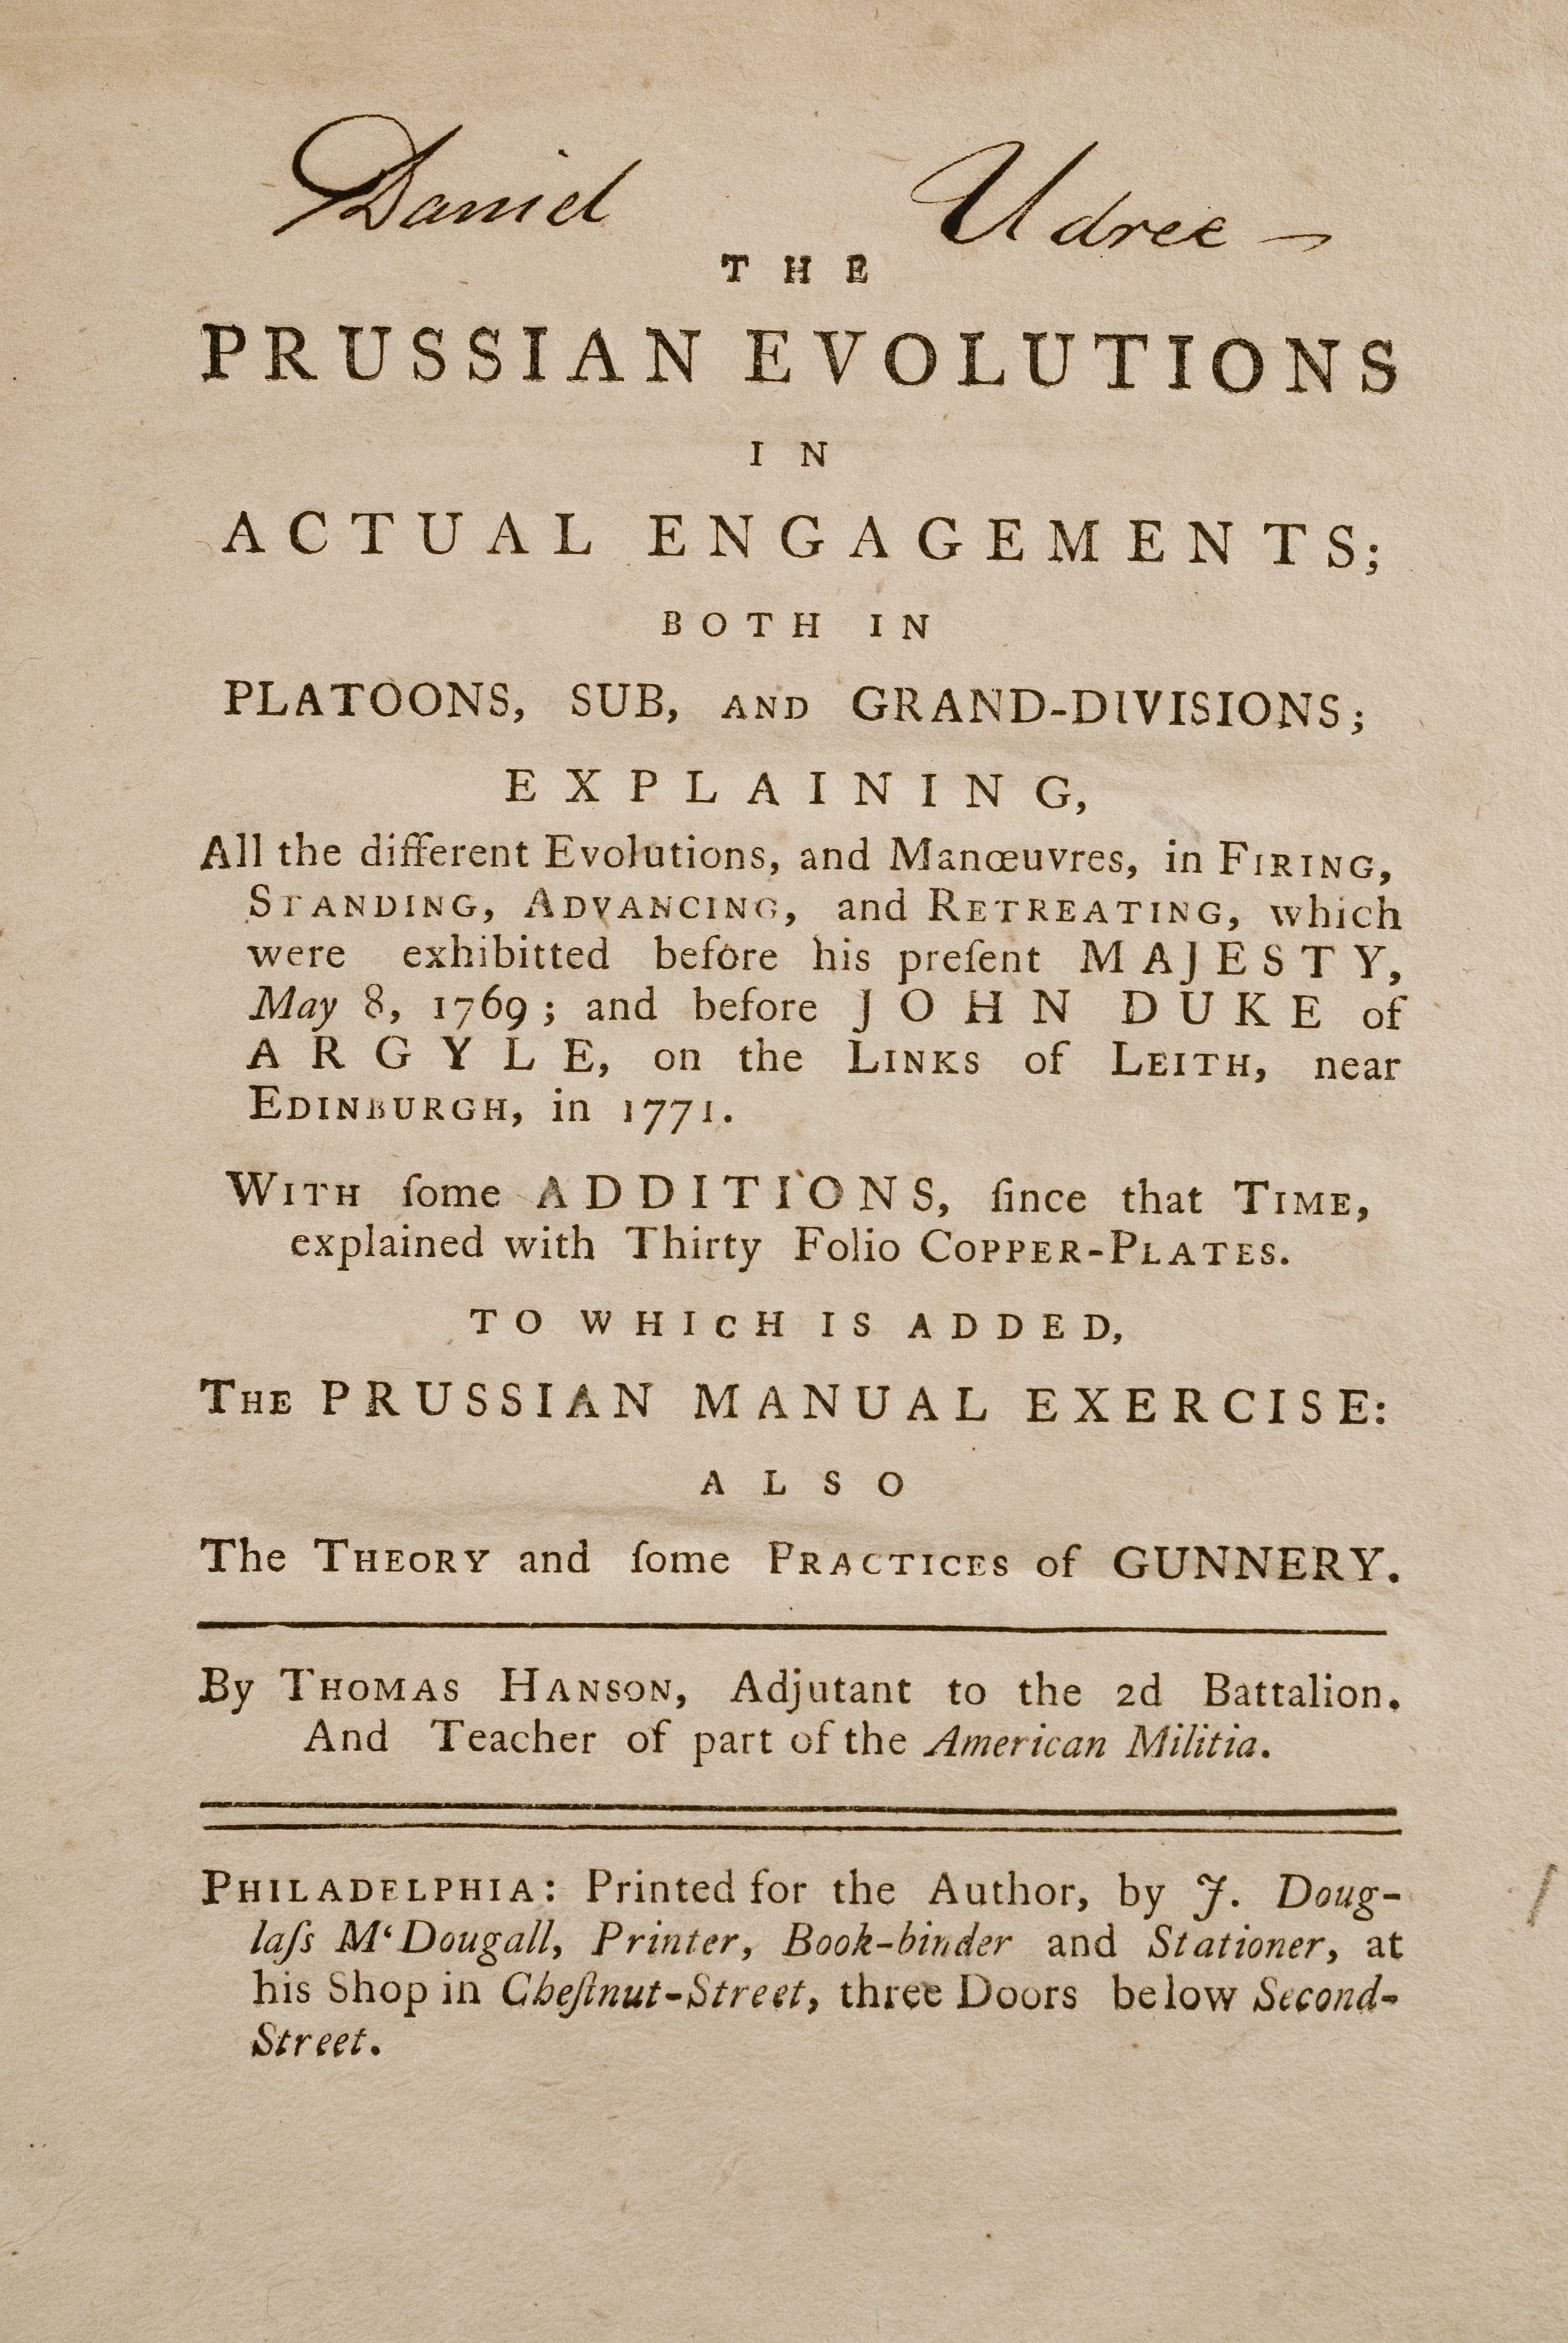 The Prussian Evolutions in Actual Engagements, Thomas Hanson, Philadelphia: Printed for the Author, by J. Douglass M’Dougall, [1775]